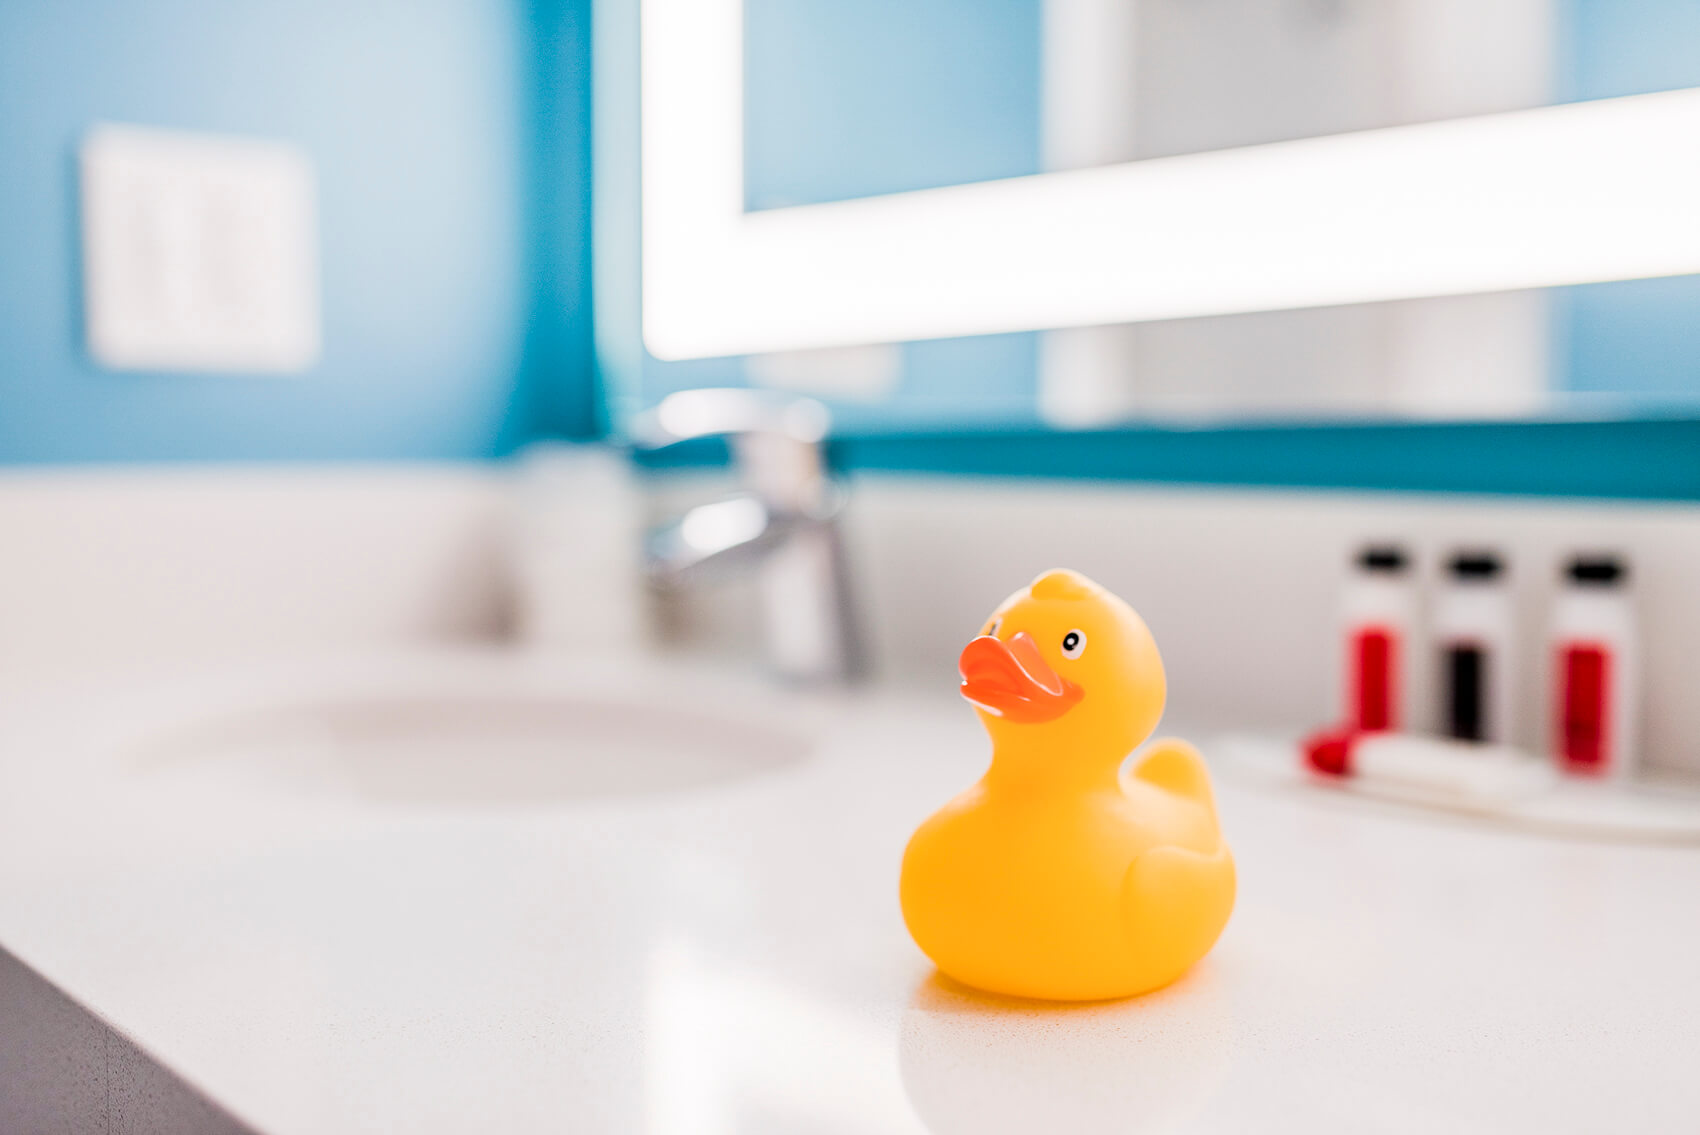 a rubber ducky sits on a hotel room bathroom